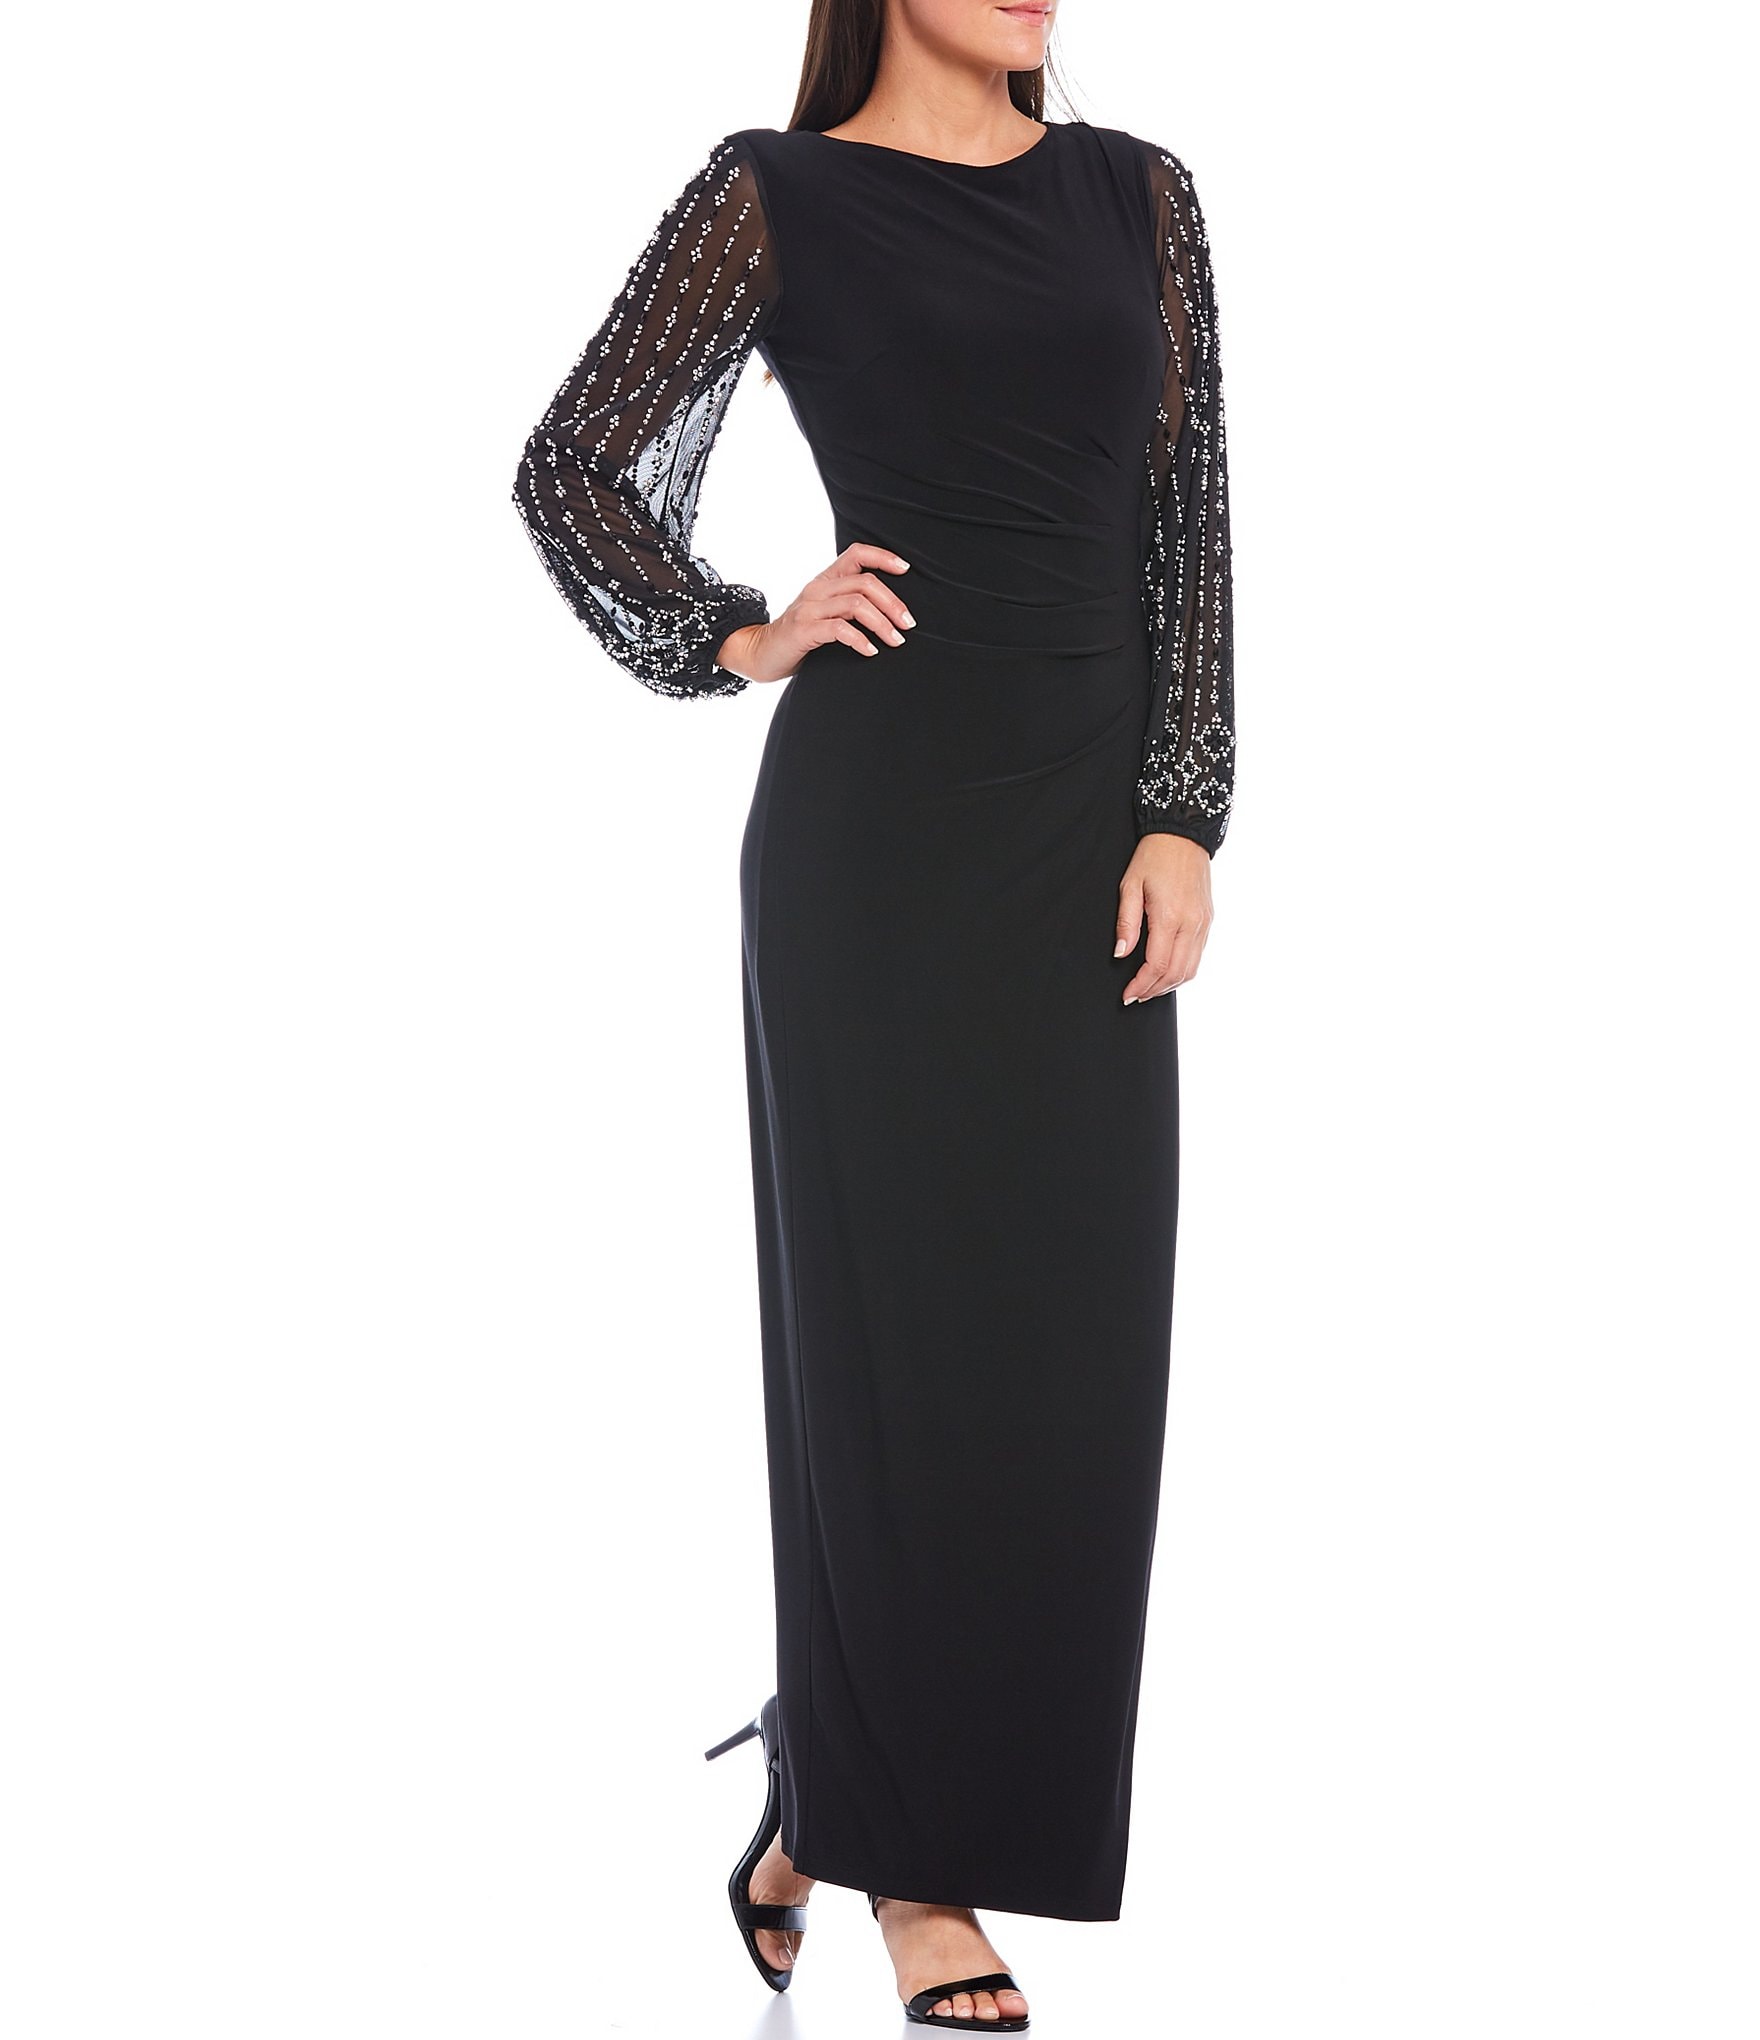 Buy > black evening gown dresses > in stock